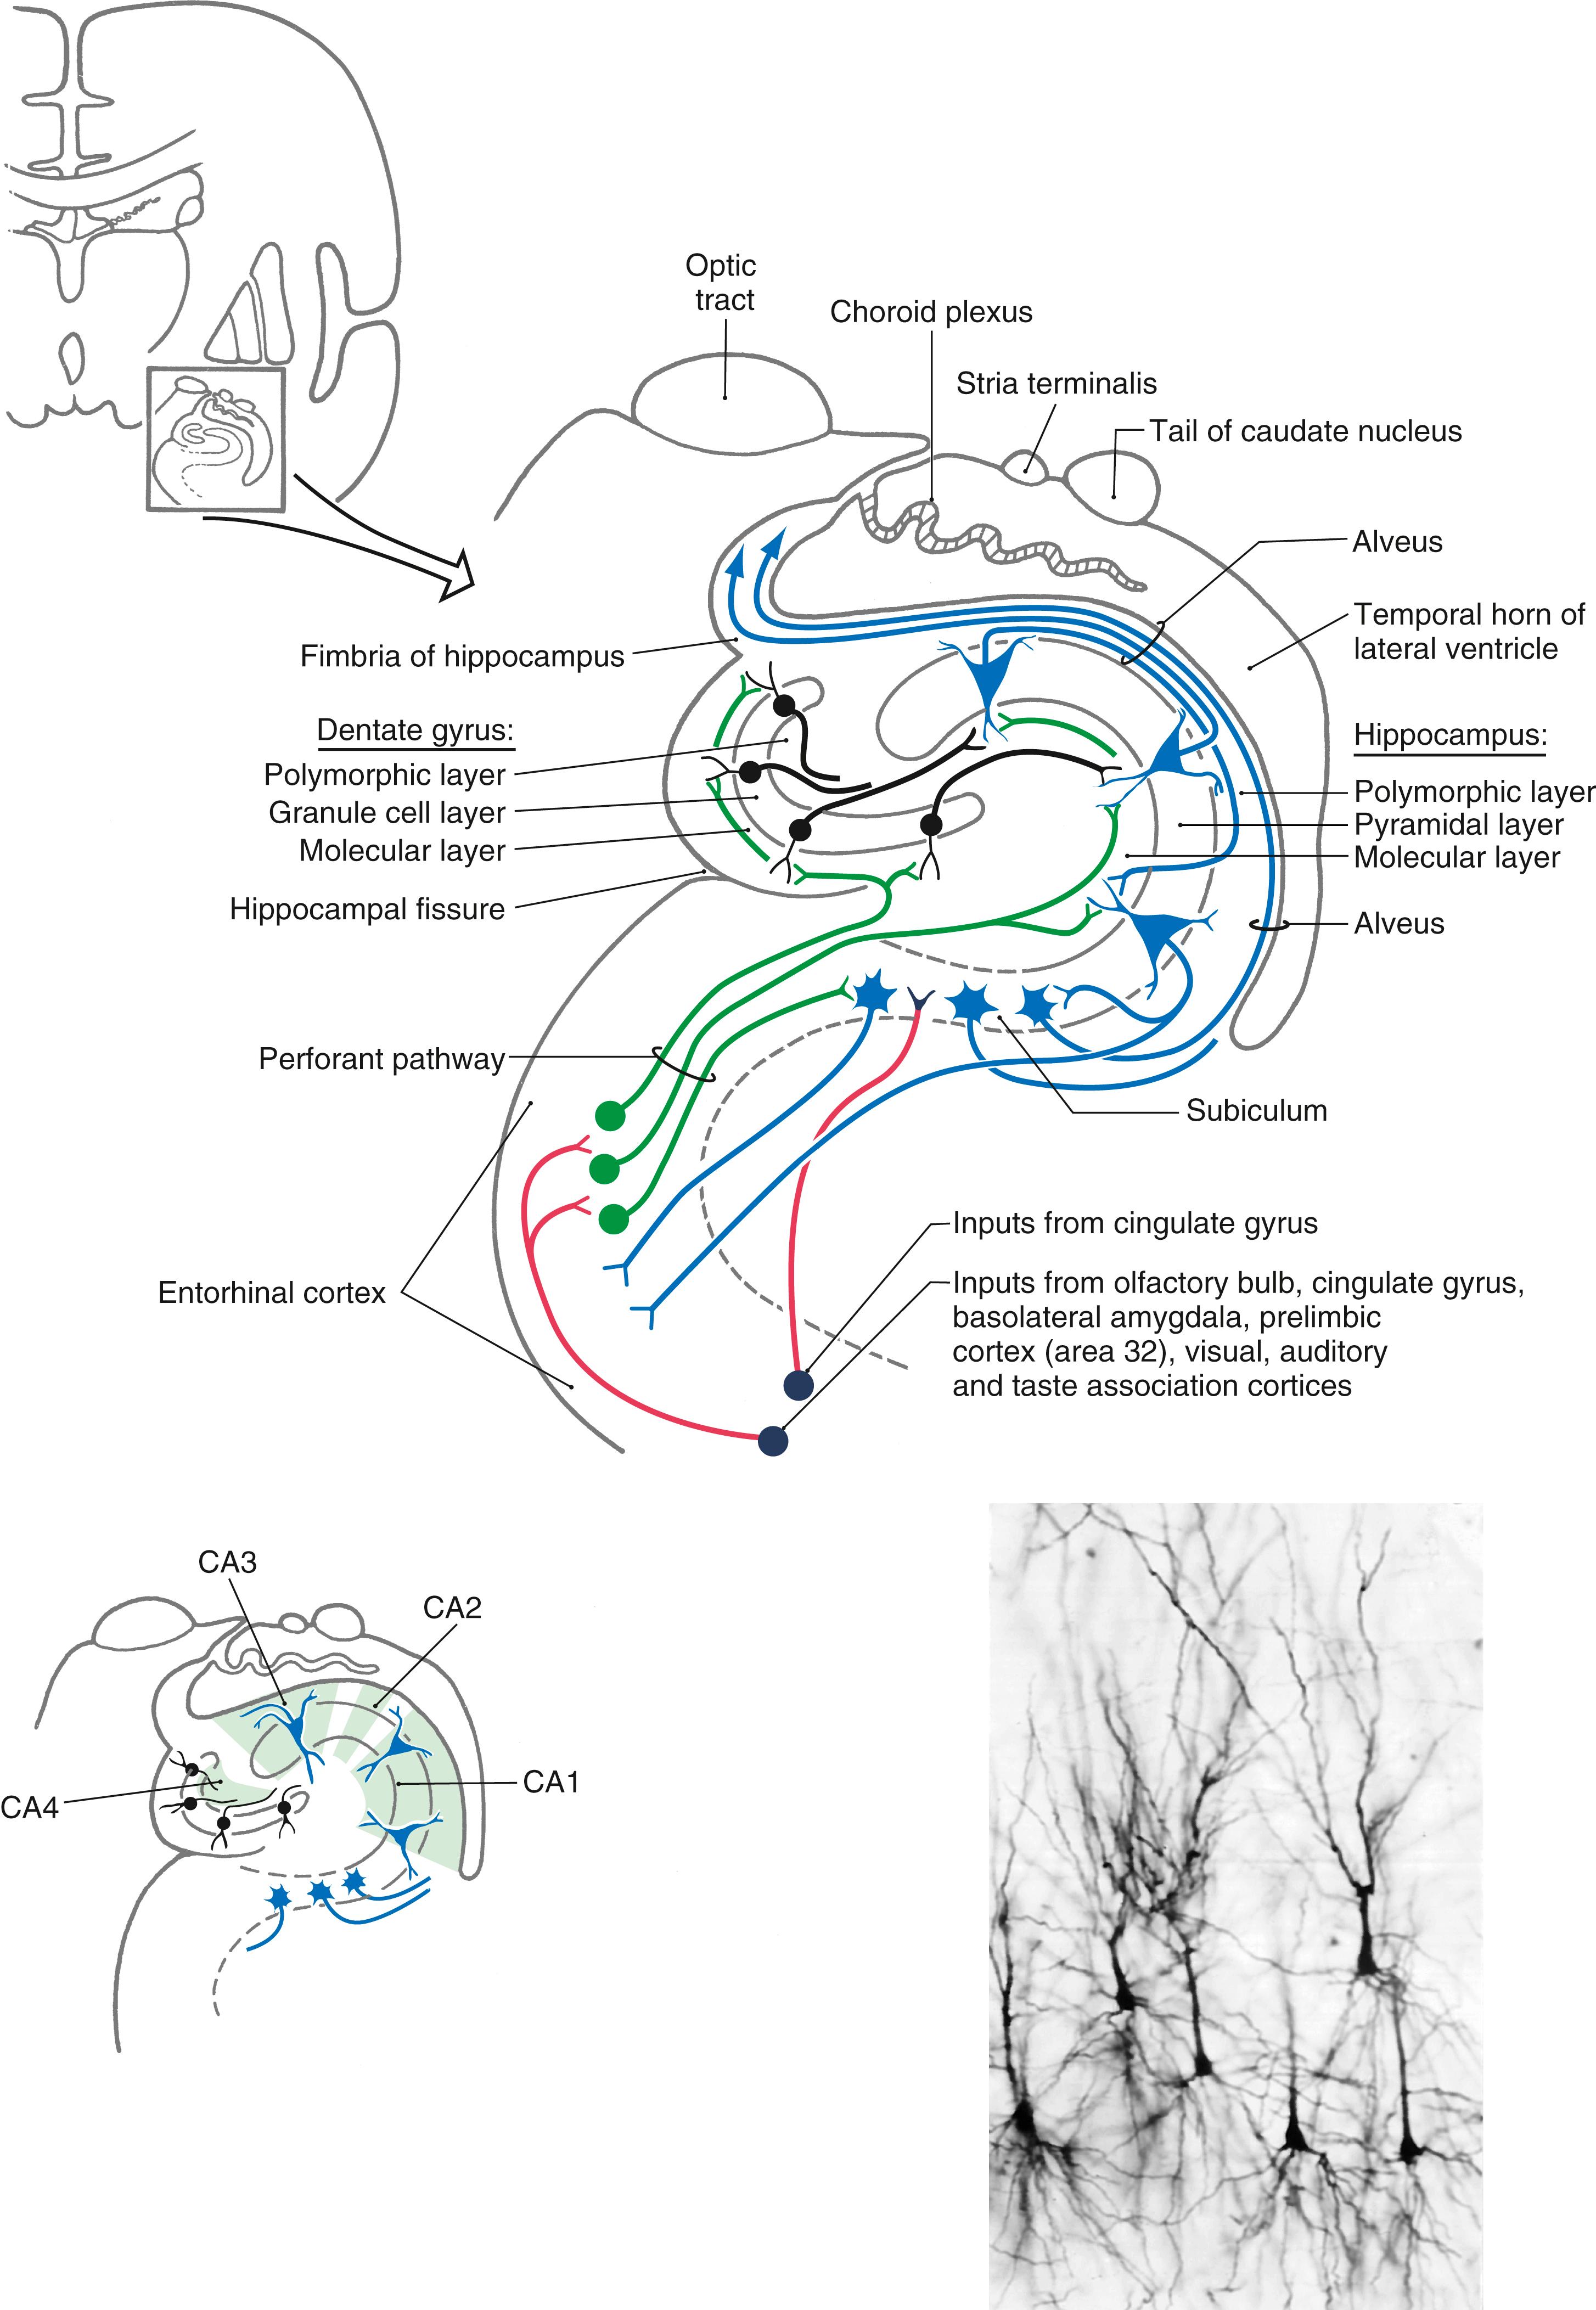 Fig. 31.4, The basic structure of the hippocampal formation and its relation to adjacent structures. The cell types of the dentate gyrus, hippocampus, and subiculum are shown diagrammatically. The general locations of fields C1 to C4 are shown on the lower left; a Golgi stain of double pyramidal cells is shown at the lower right.